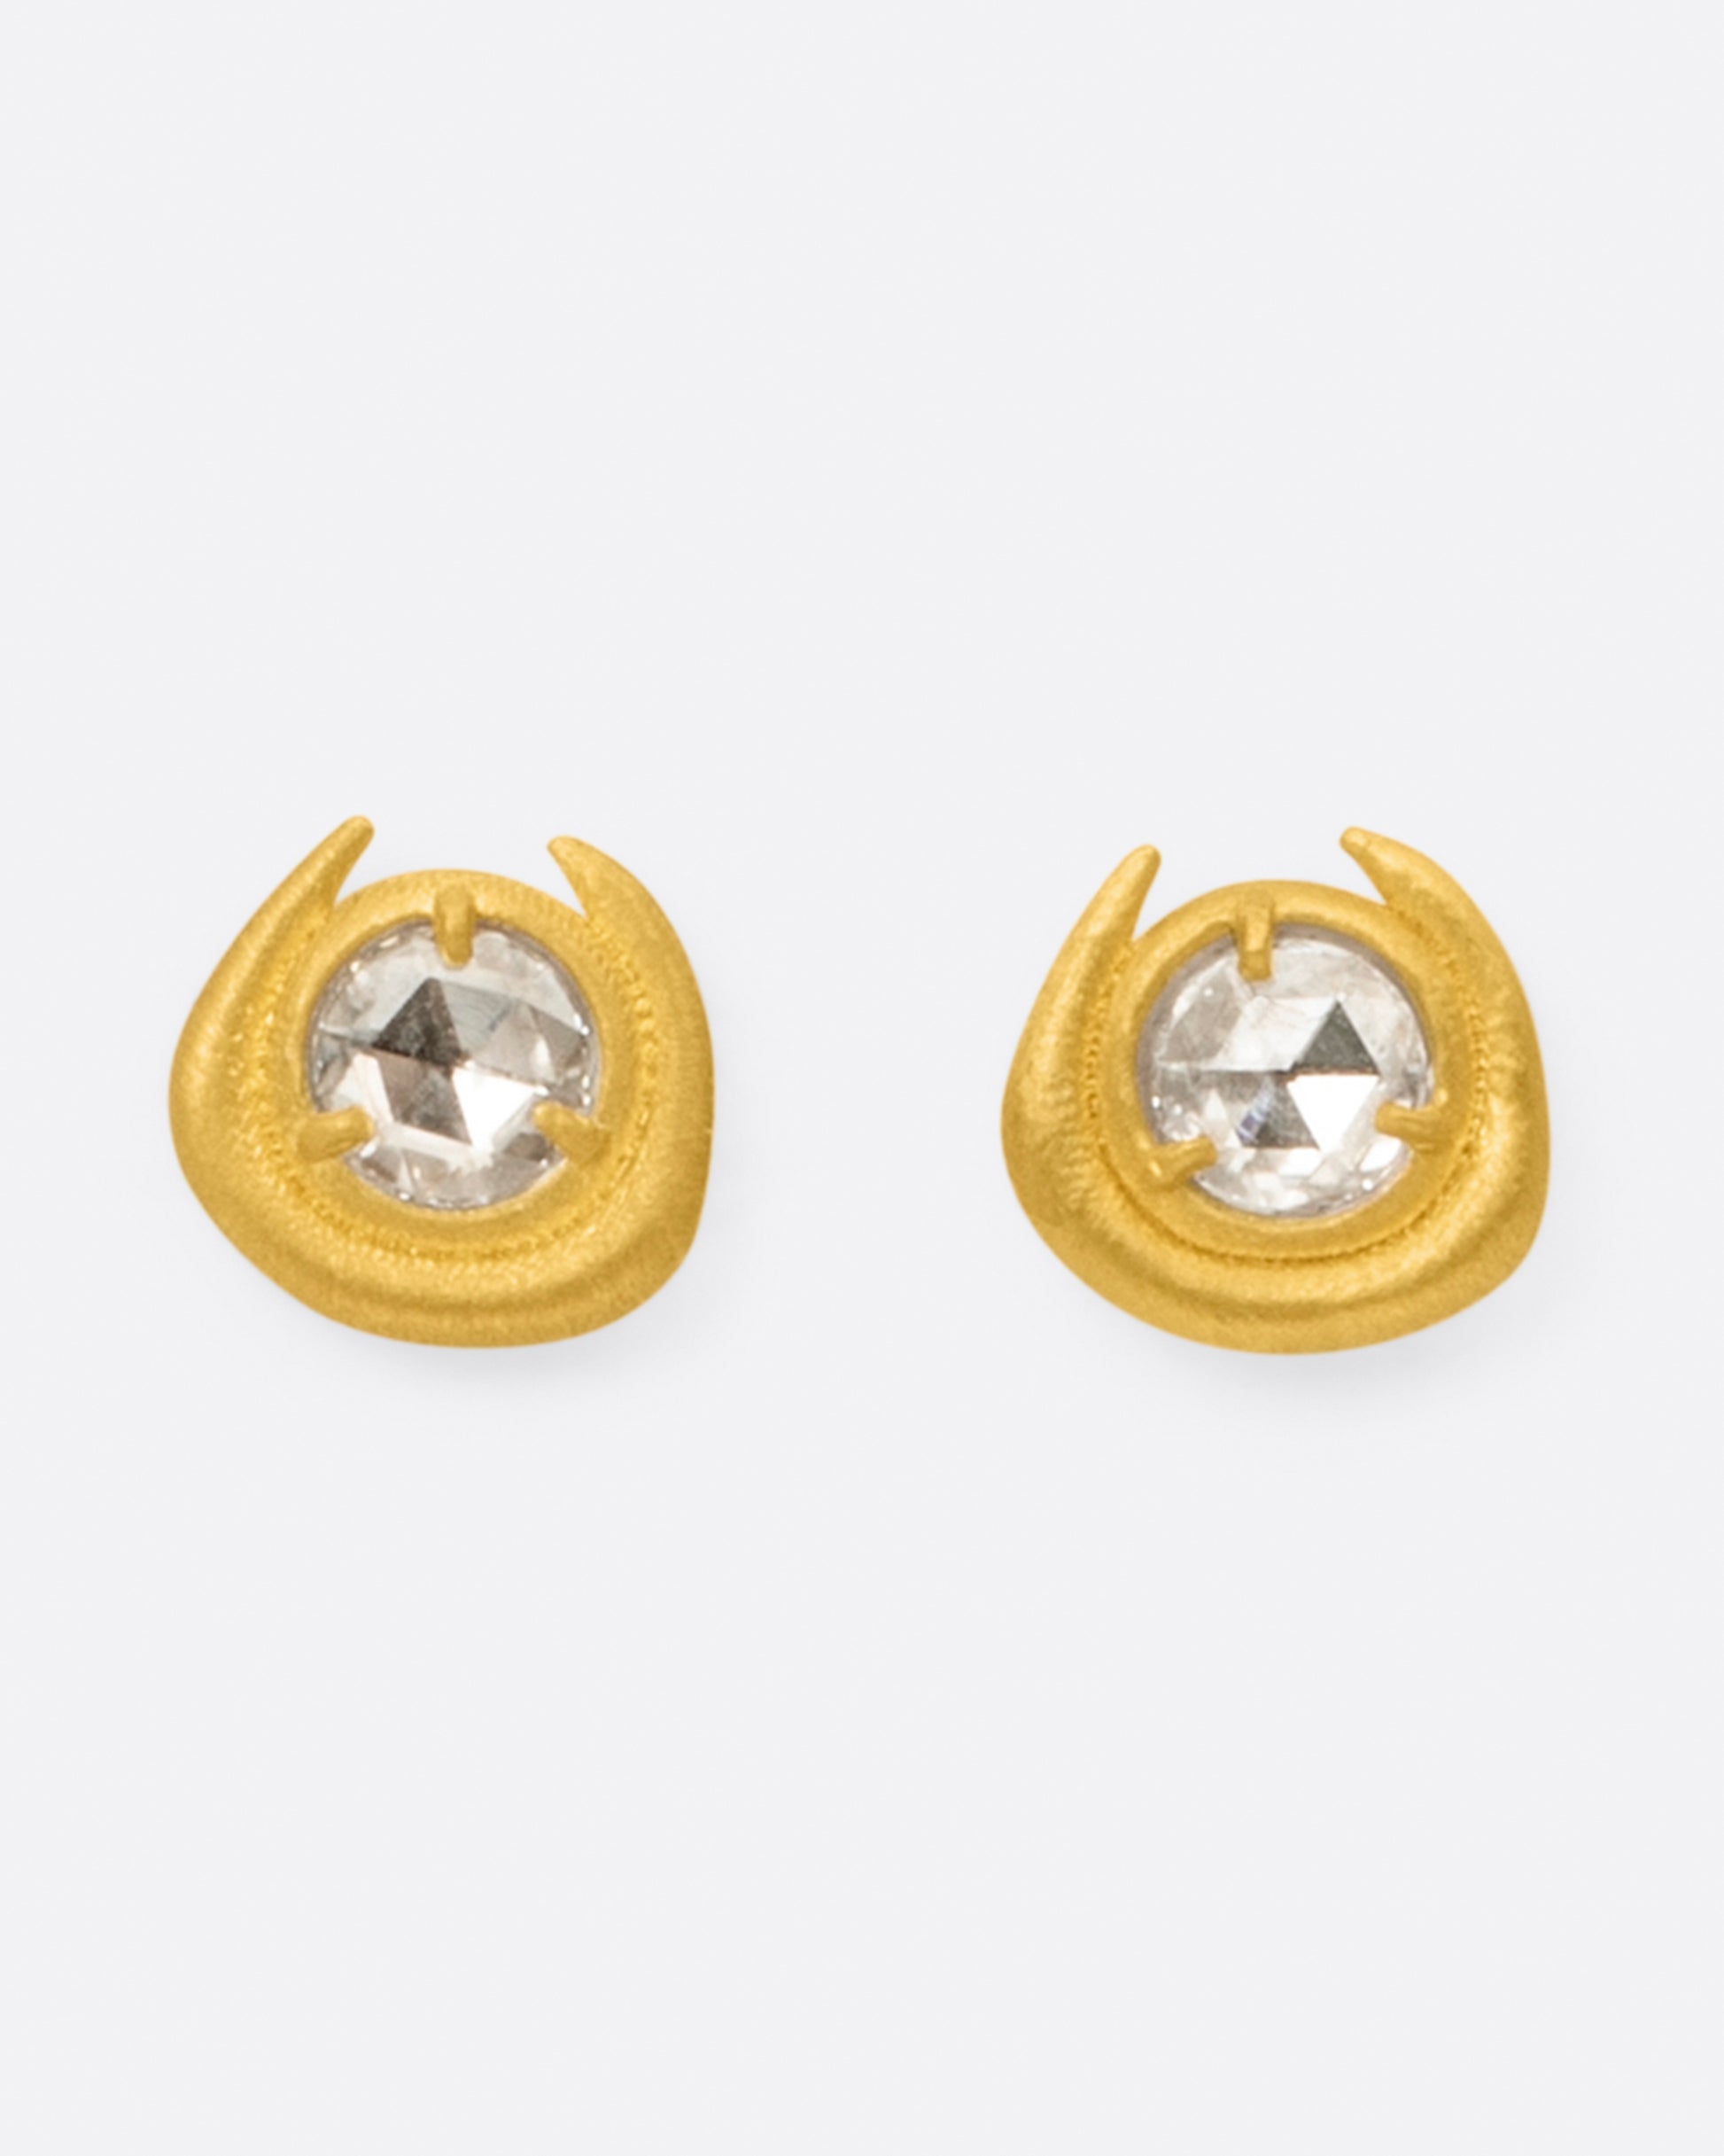 A pair of semi-circular high karat gold stud earrings with a rose cut diamond at their centers, shown from the front.